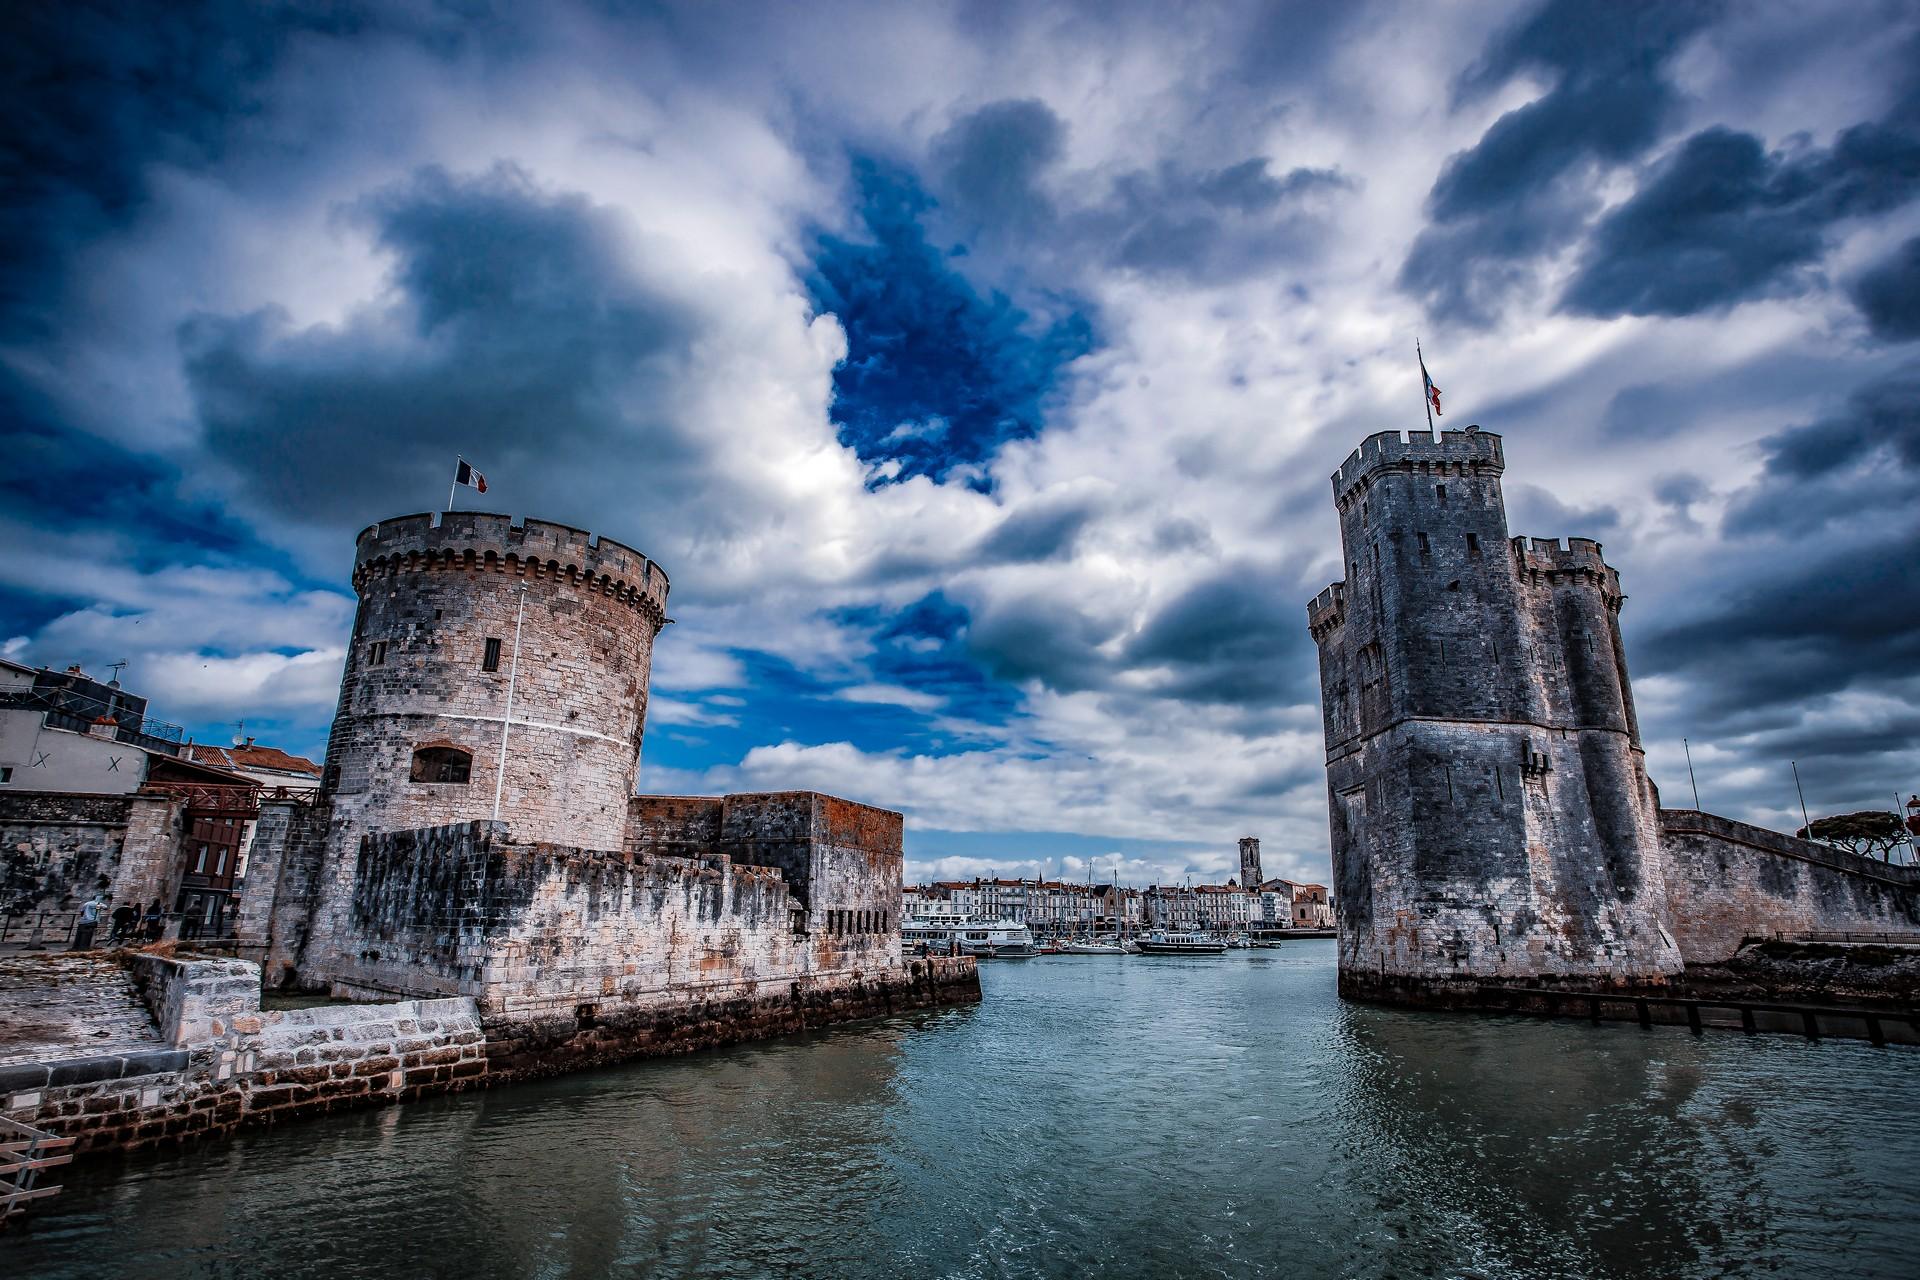 Architecture in La Rochelle with cloudy sky